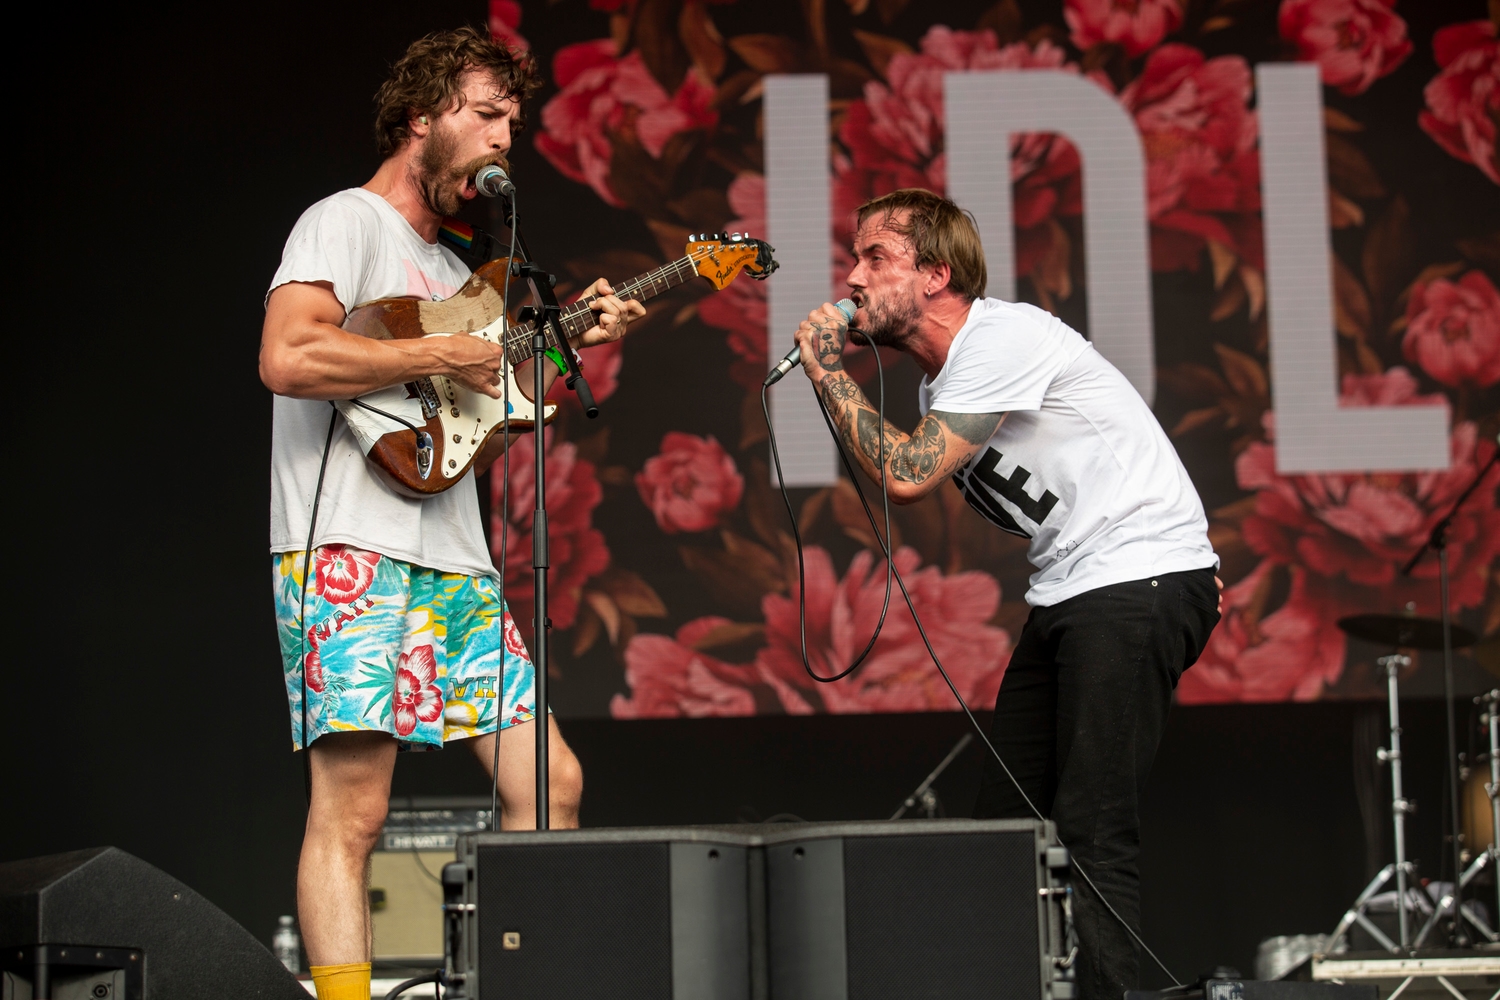 IDLES bring compassion and ferocity to Bestival 2018